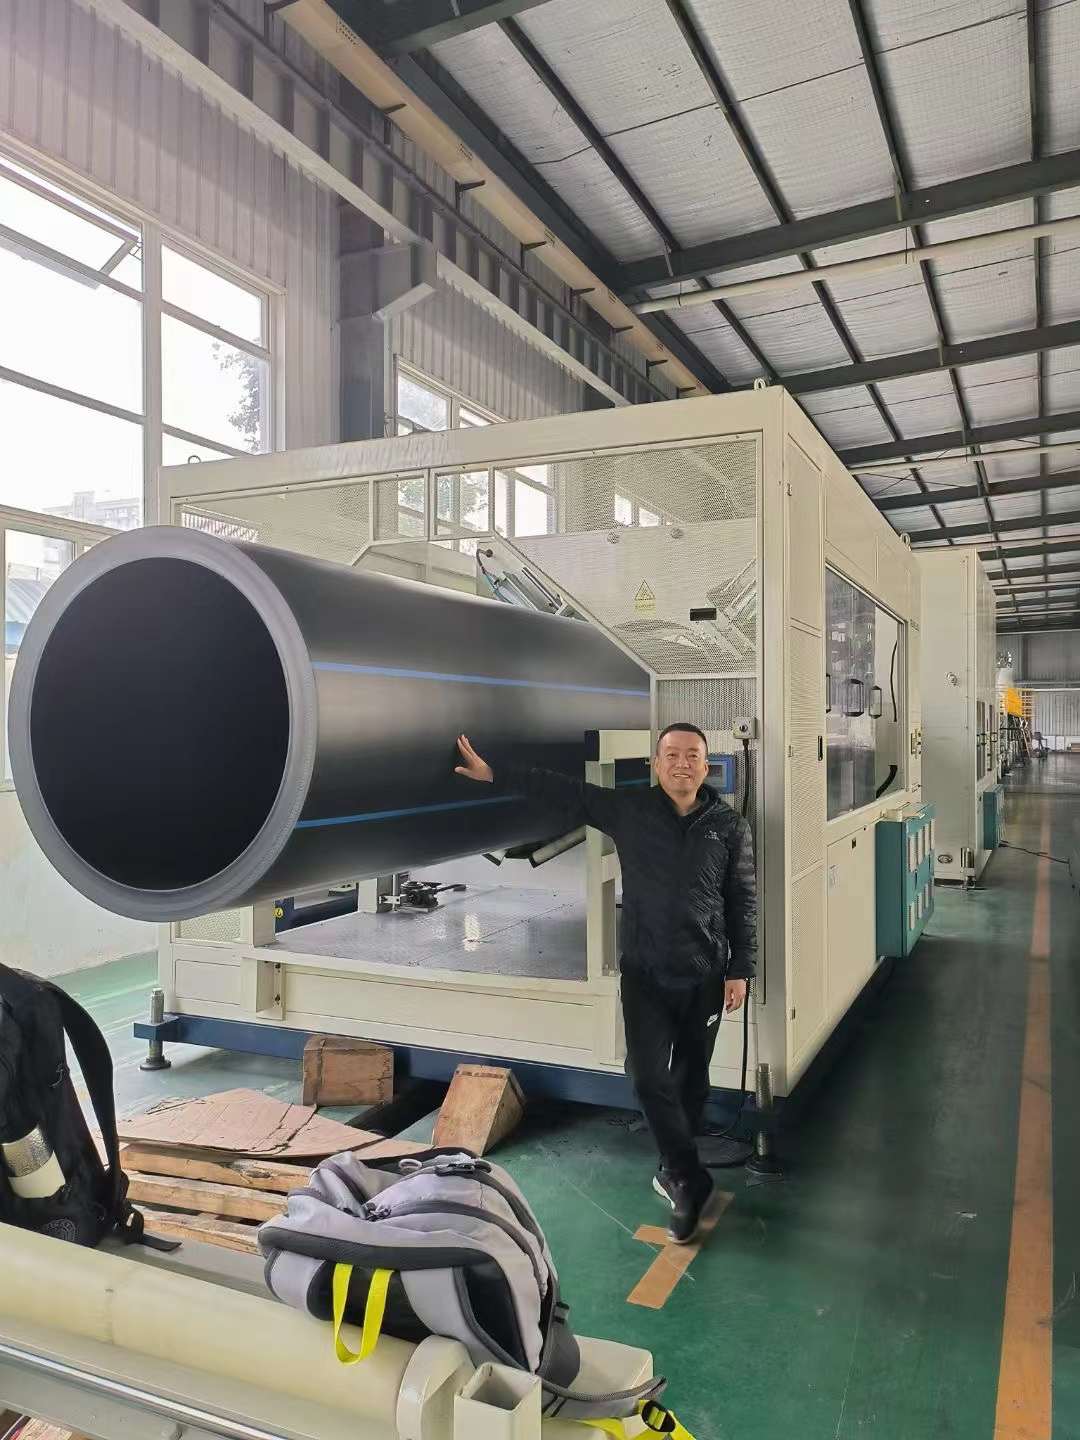 Good News! Fangli PE（1200mm）large-diameter anti-melt sagging thick-walled pipe extrusion equipment was successfully accepted by the customer